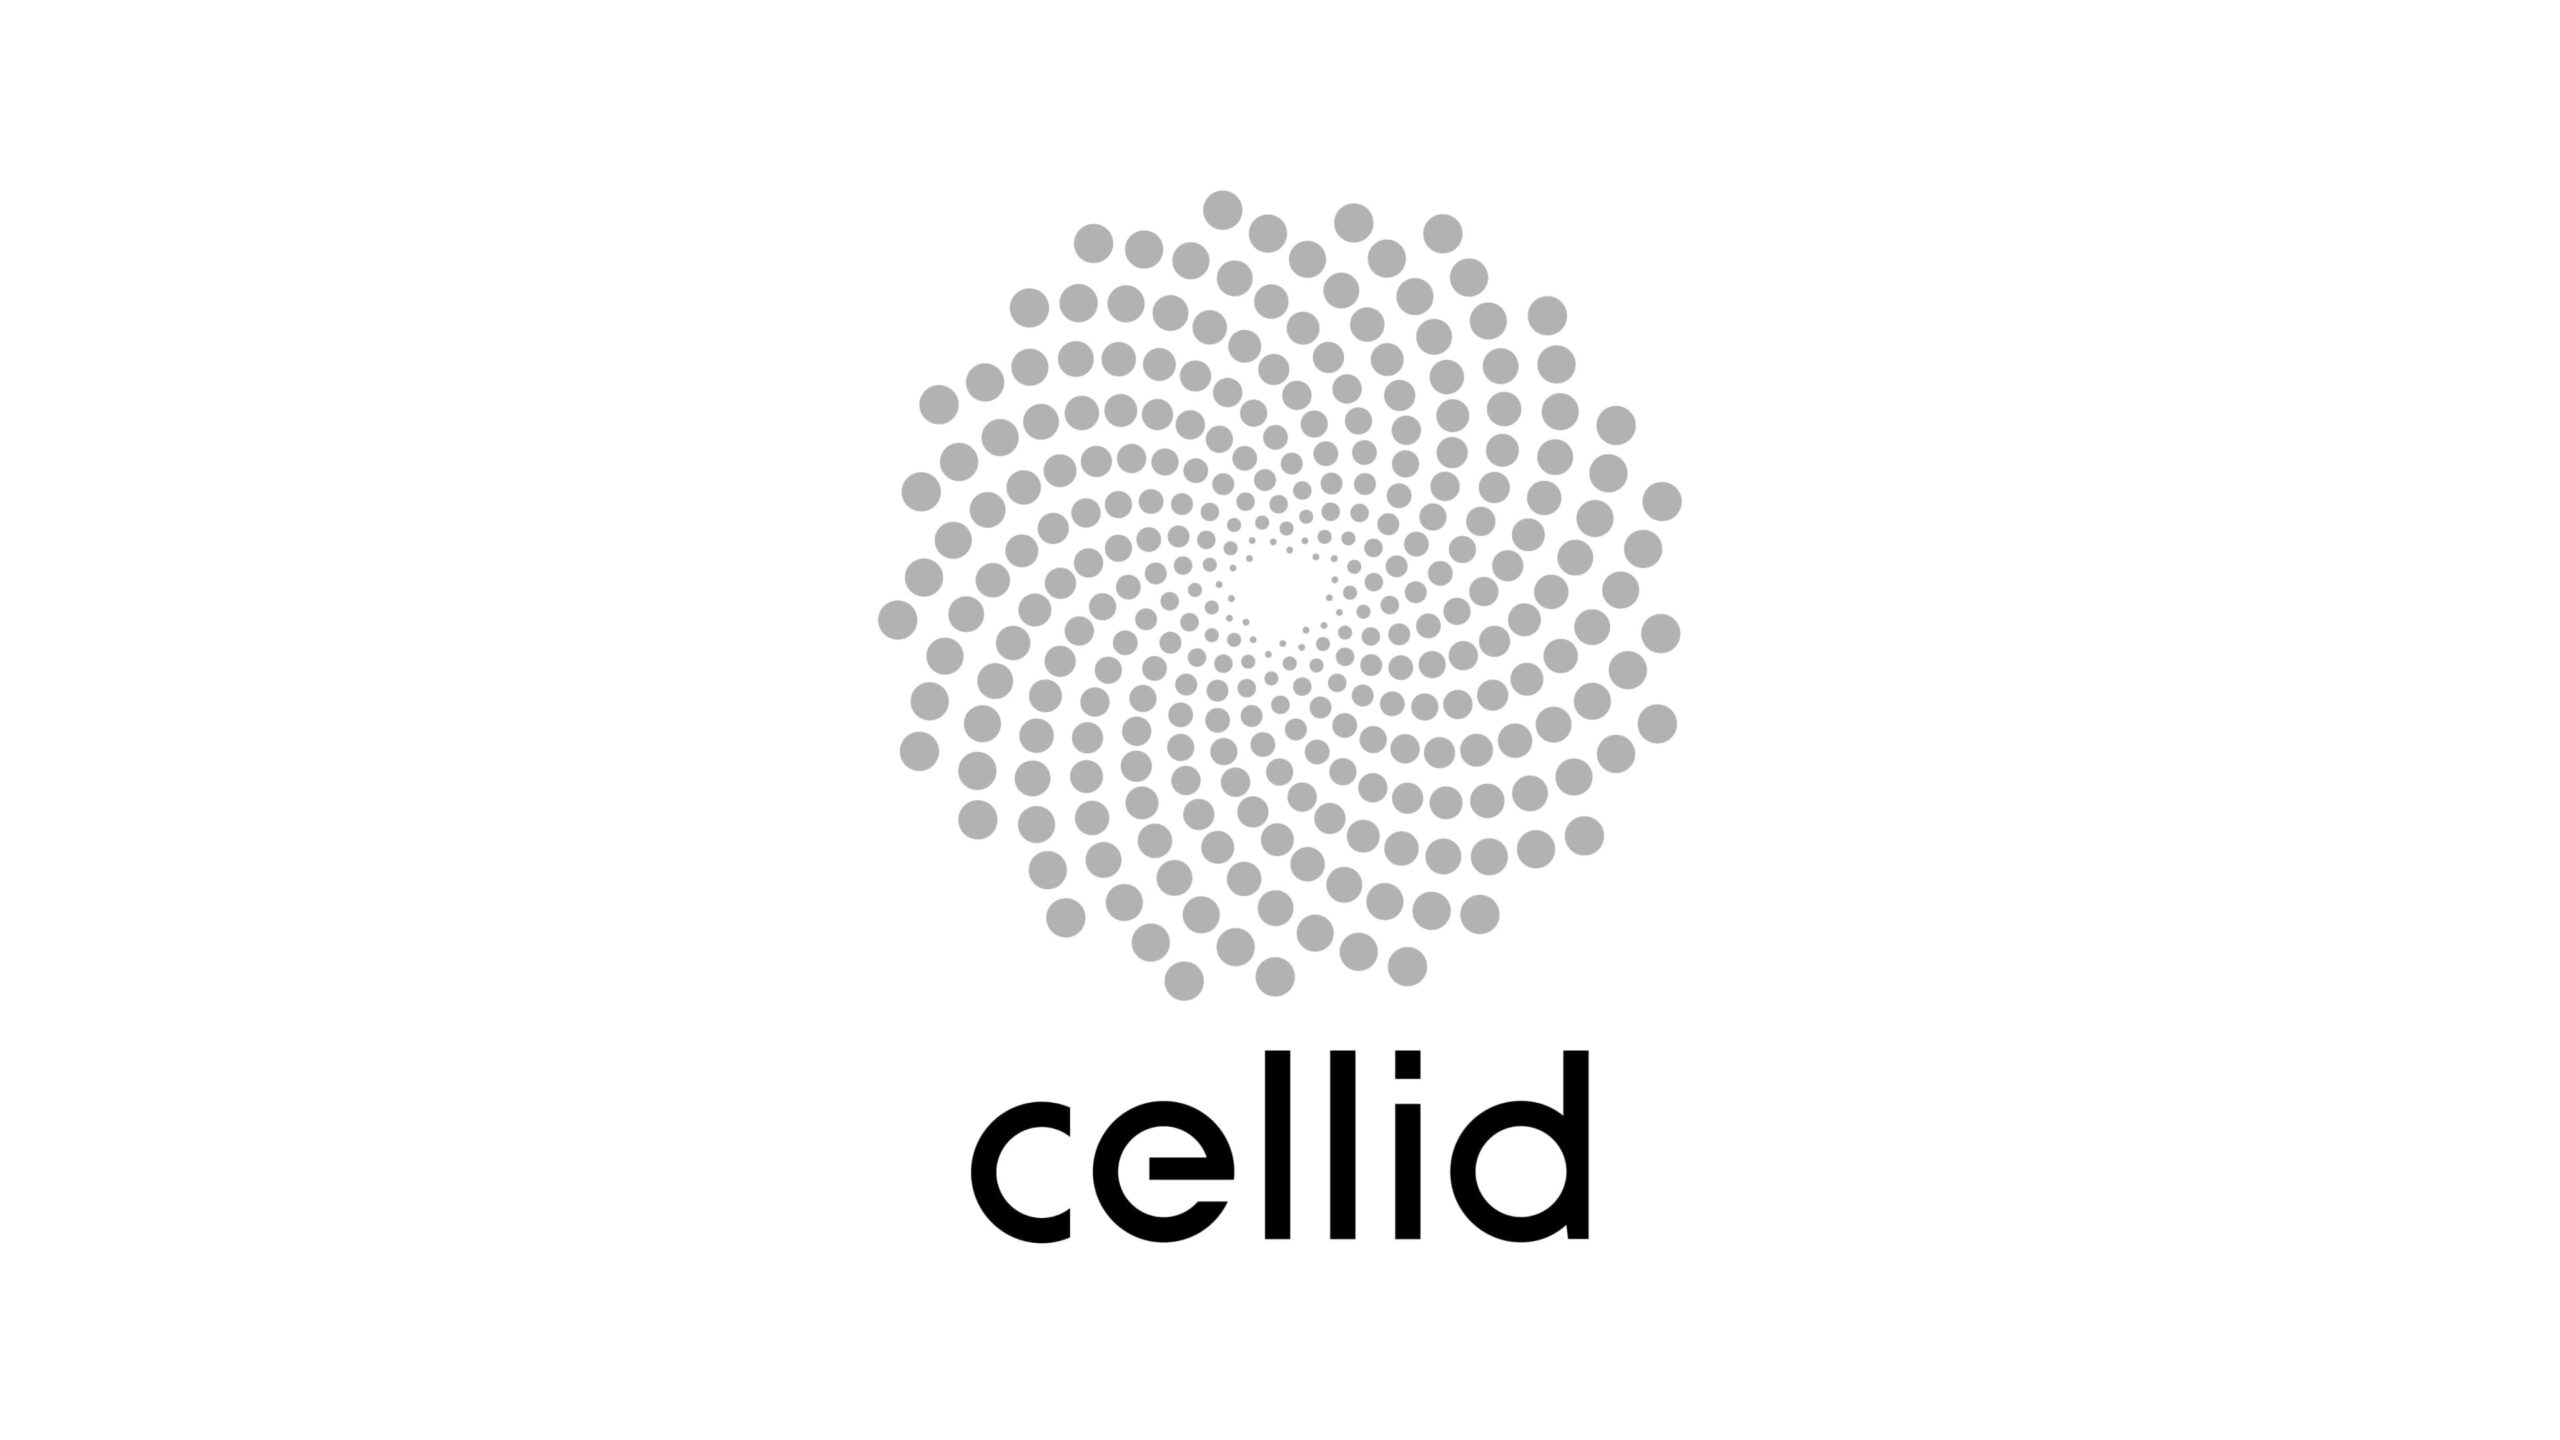 Cellid株式会社がGeneral Interface Solution (GIS) Holding Limitedより資金調達を実施